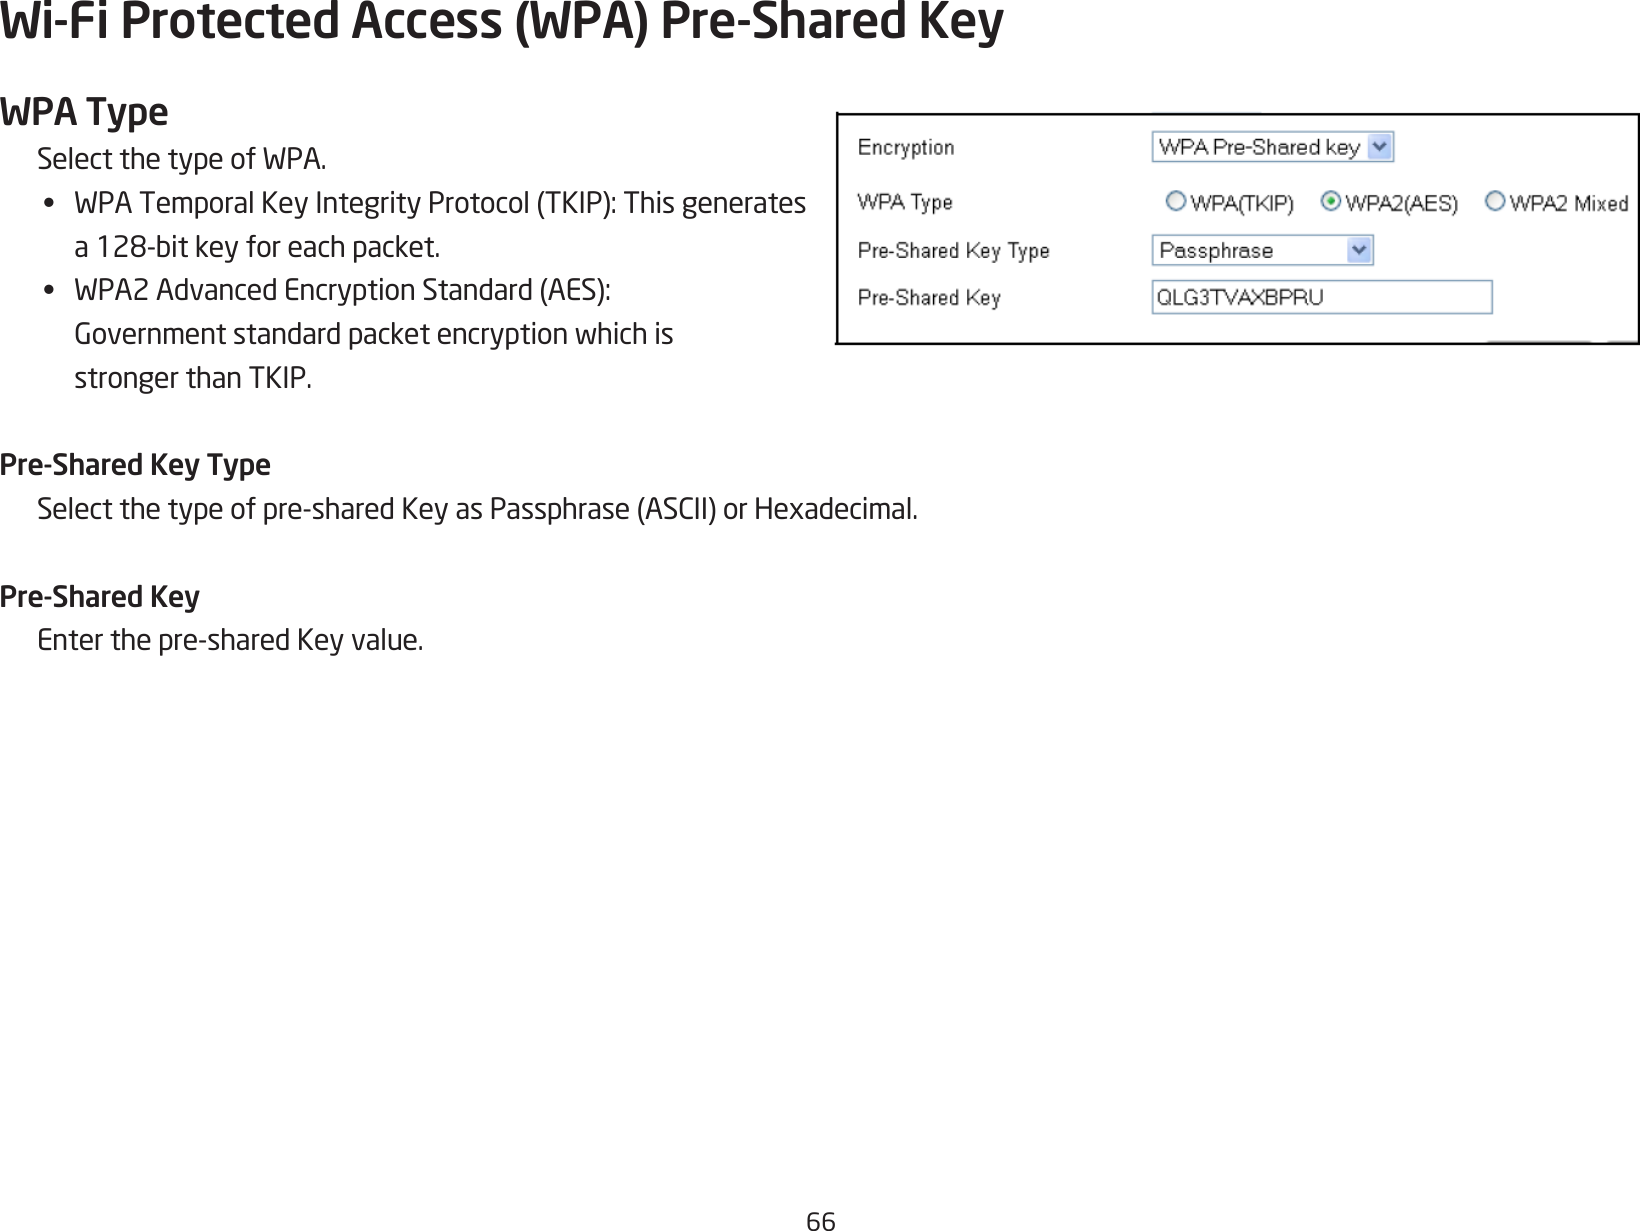 66Wi-Fi Protected Access (WPA) Pre-Shared KeyWPA TypeSelectthetypeofWPA.•  WPATemporalKeyIntegrityProtocol(TKIP):Thisgenerates a128-bitkeyforeachpacket.•  WPA2AdvancedEncryptionStandard(AES): Governmentstandardpacketencryptionwhichis  stronger than TKIP.Pre-Shared Key TypeSelectthetypeofpre-sharedKeyasPassphrase(ASCII)orHexadecimal.Pre-Shared KeyEnterthepre-sharedKeyvalue.